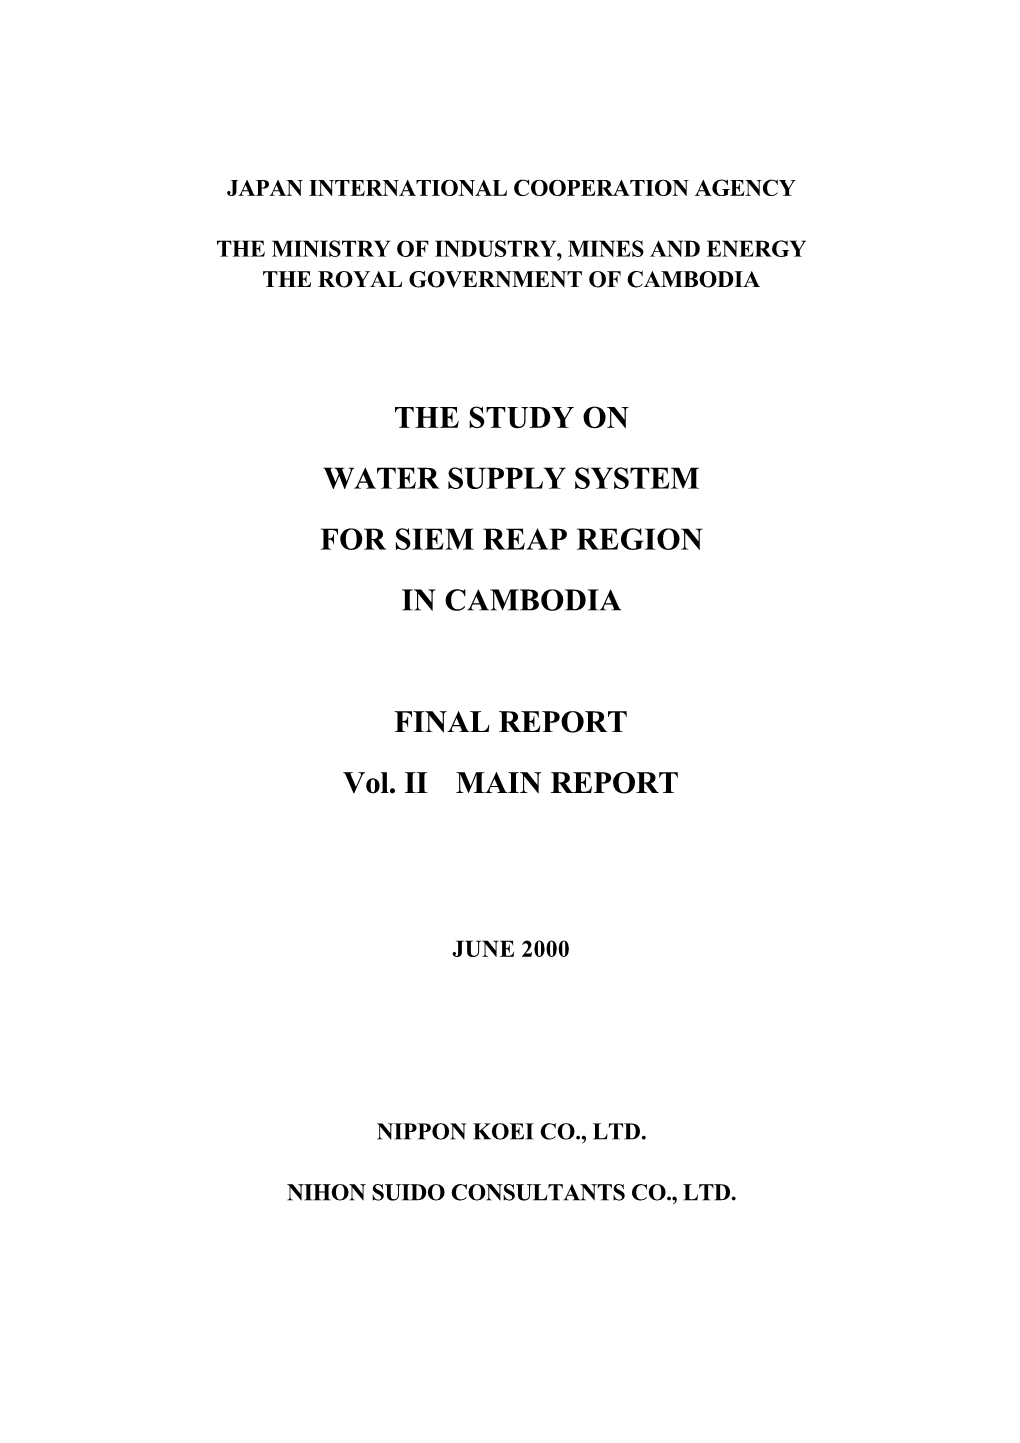 The Study on Water Supply System for Siem Reap Region in Cambodia